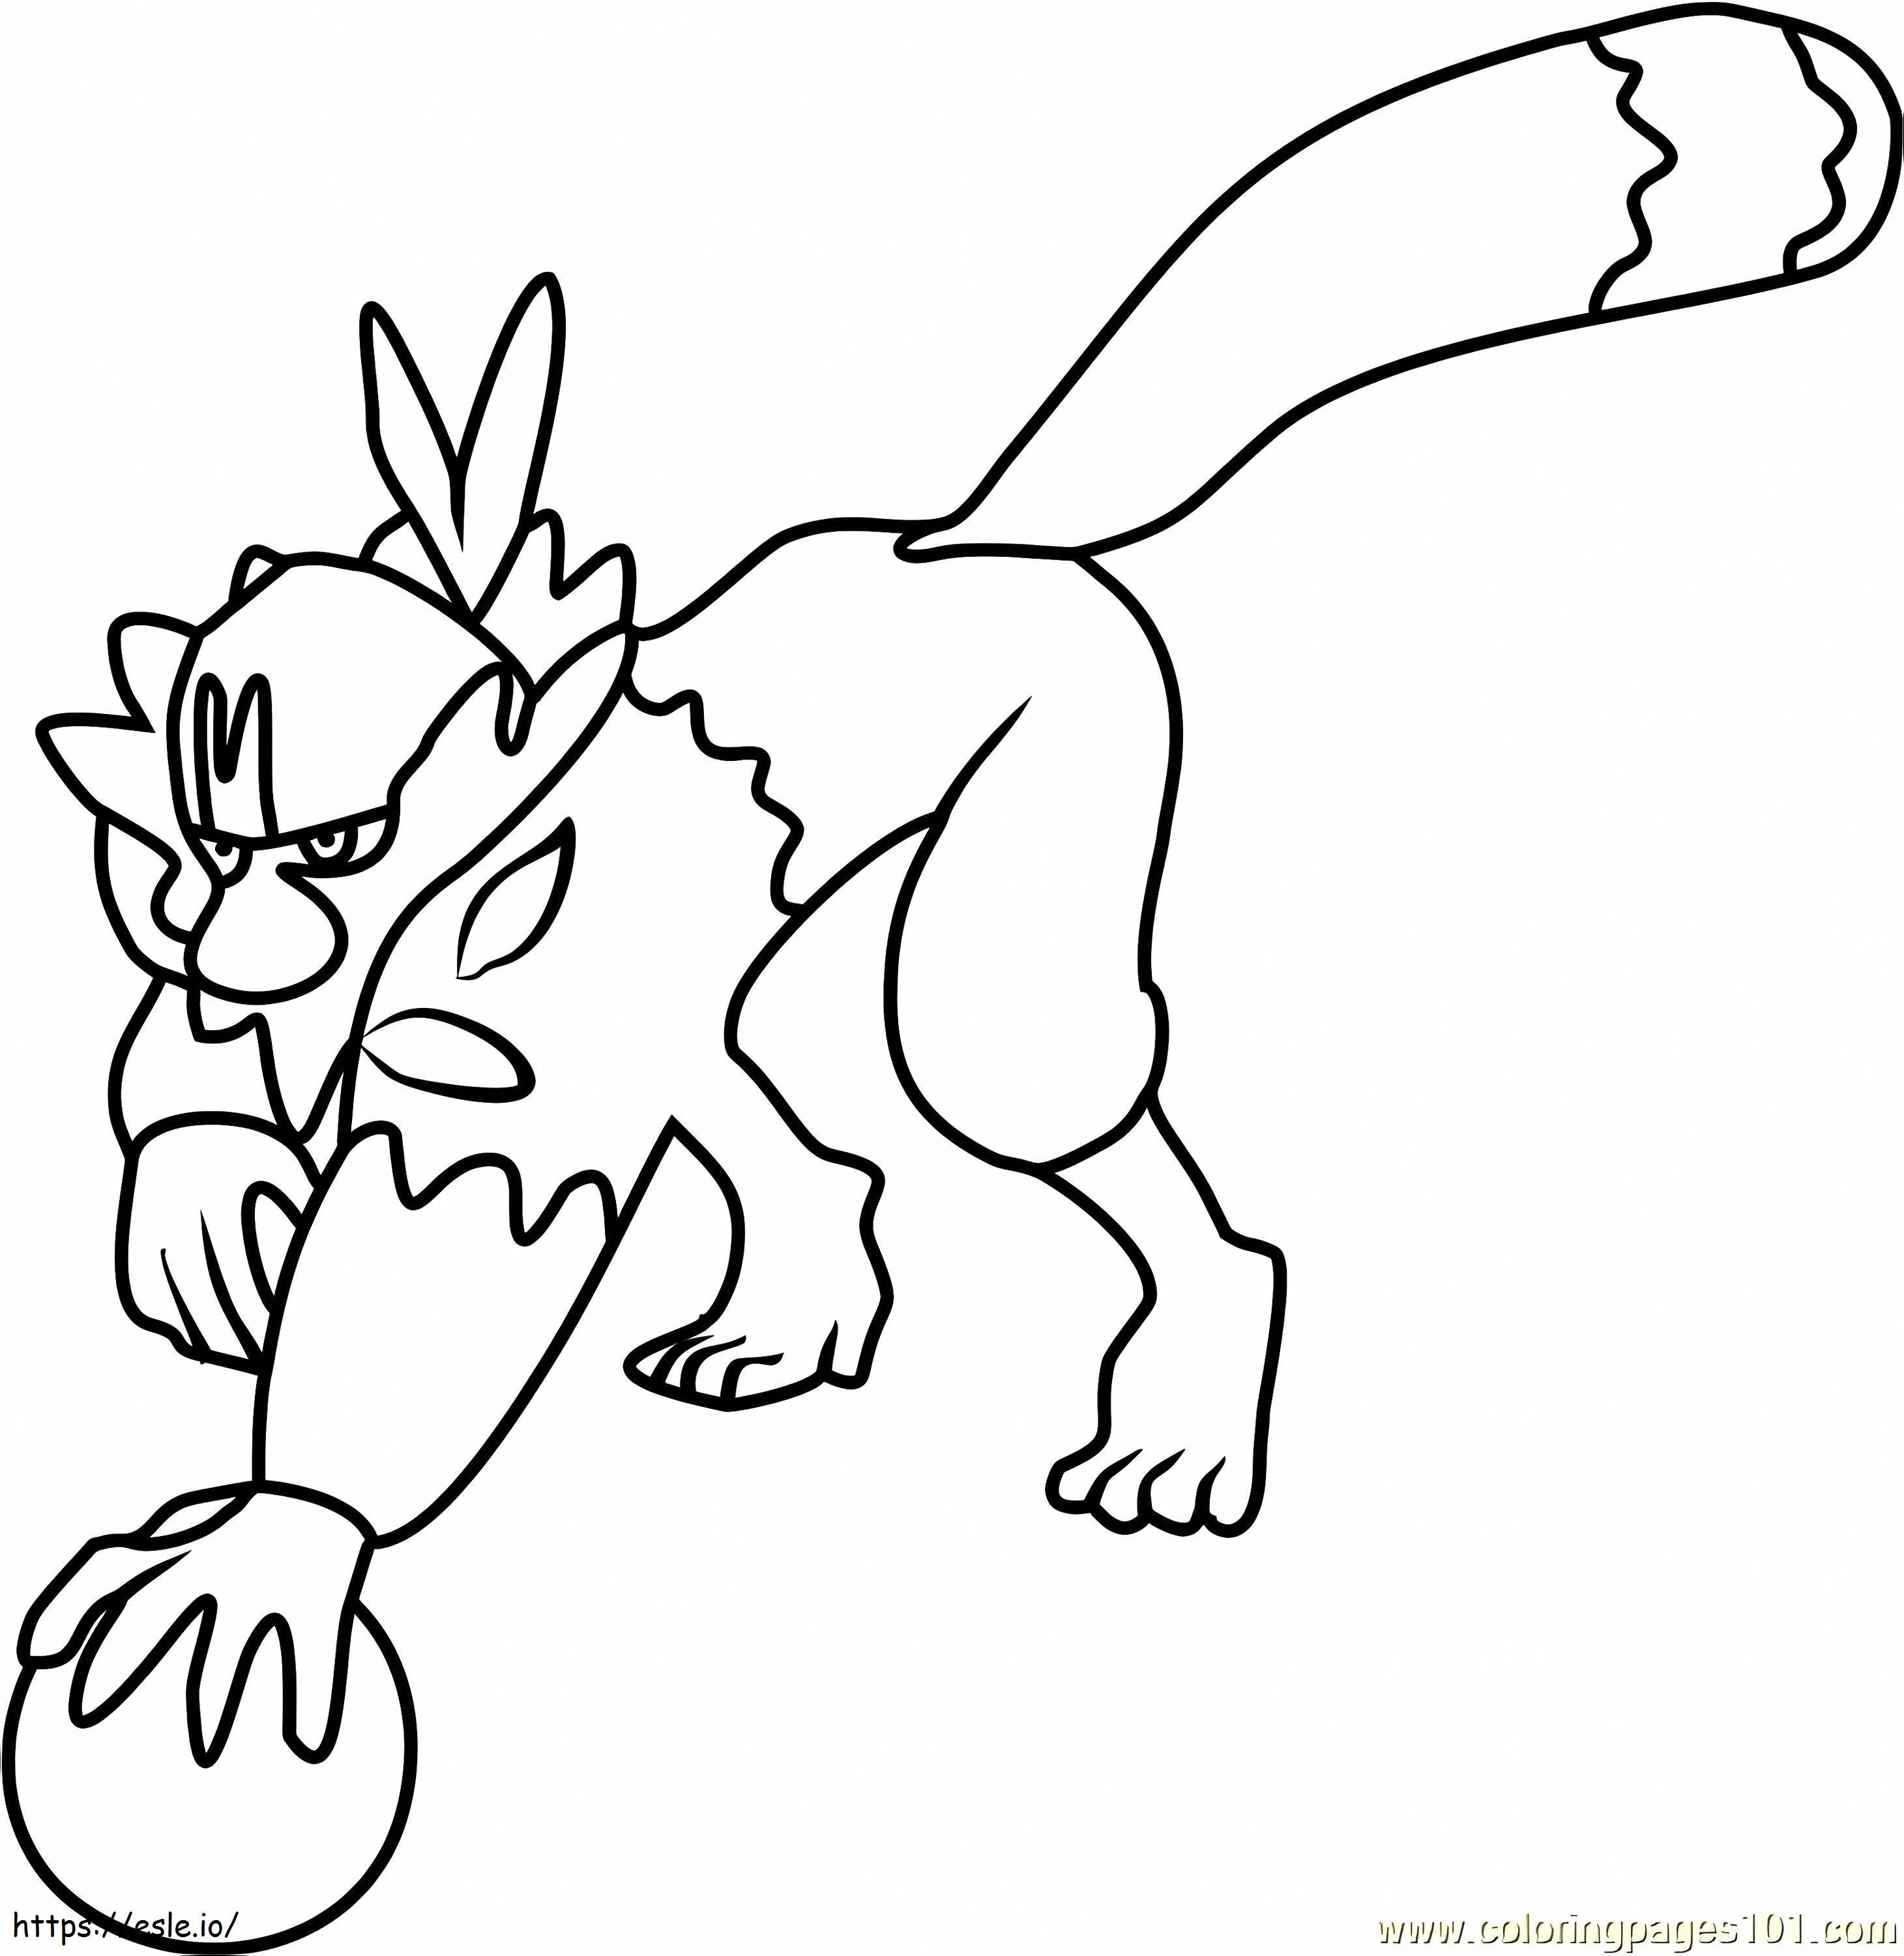 1527738830 Passimian Pokemon Sun And Moon A4 coloring page